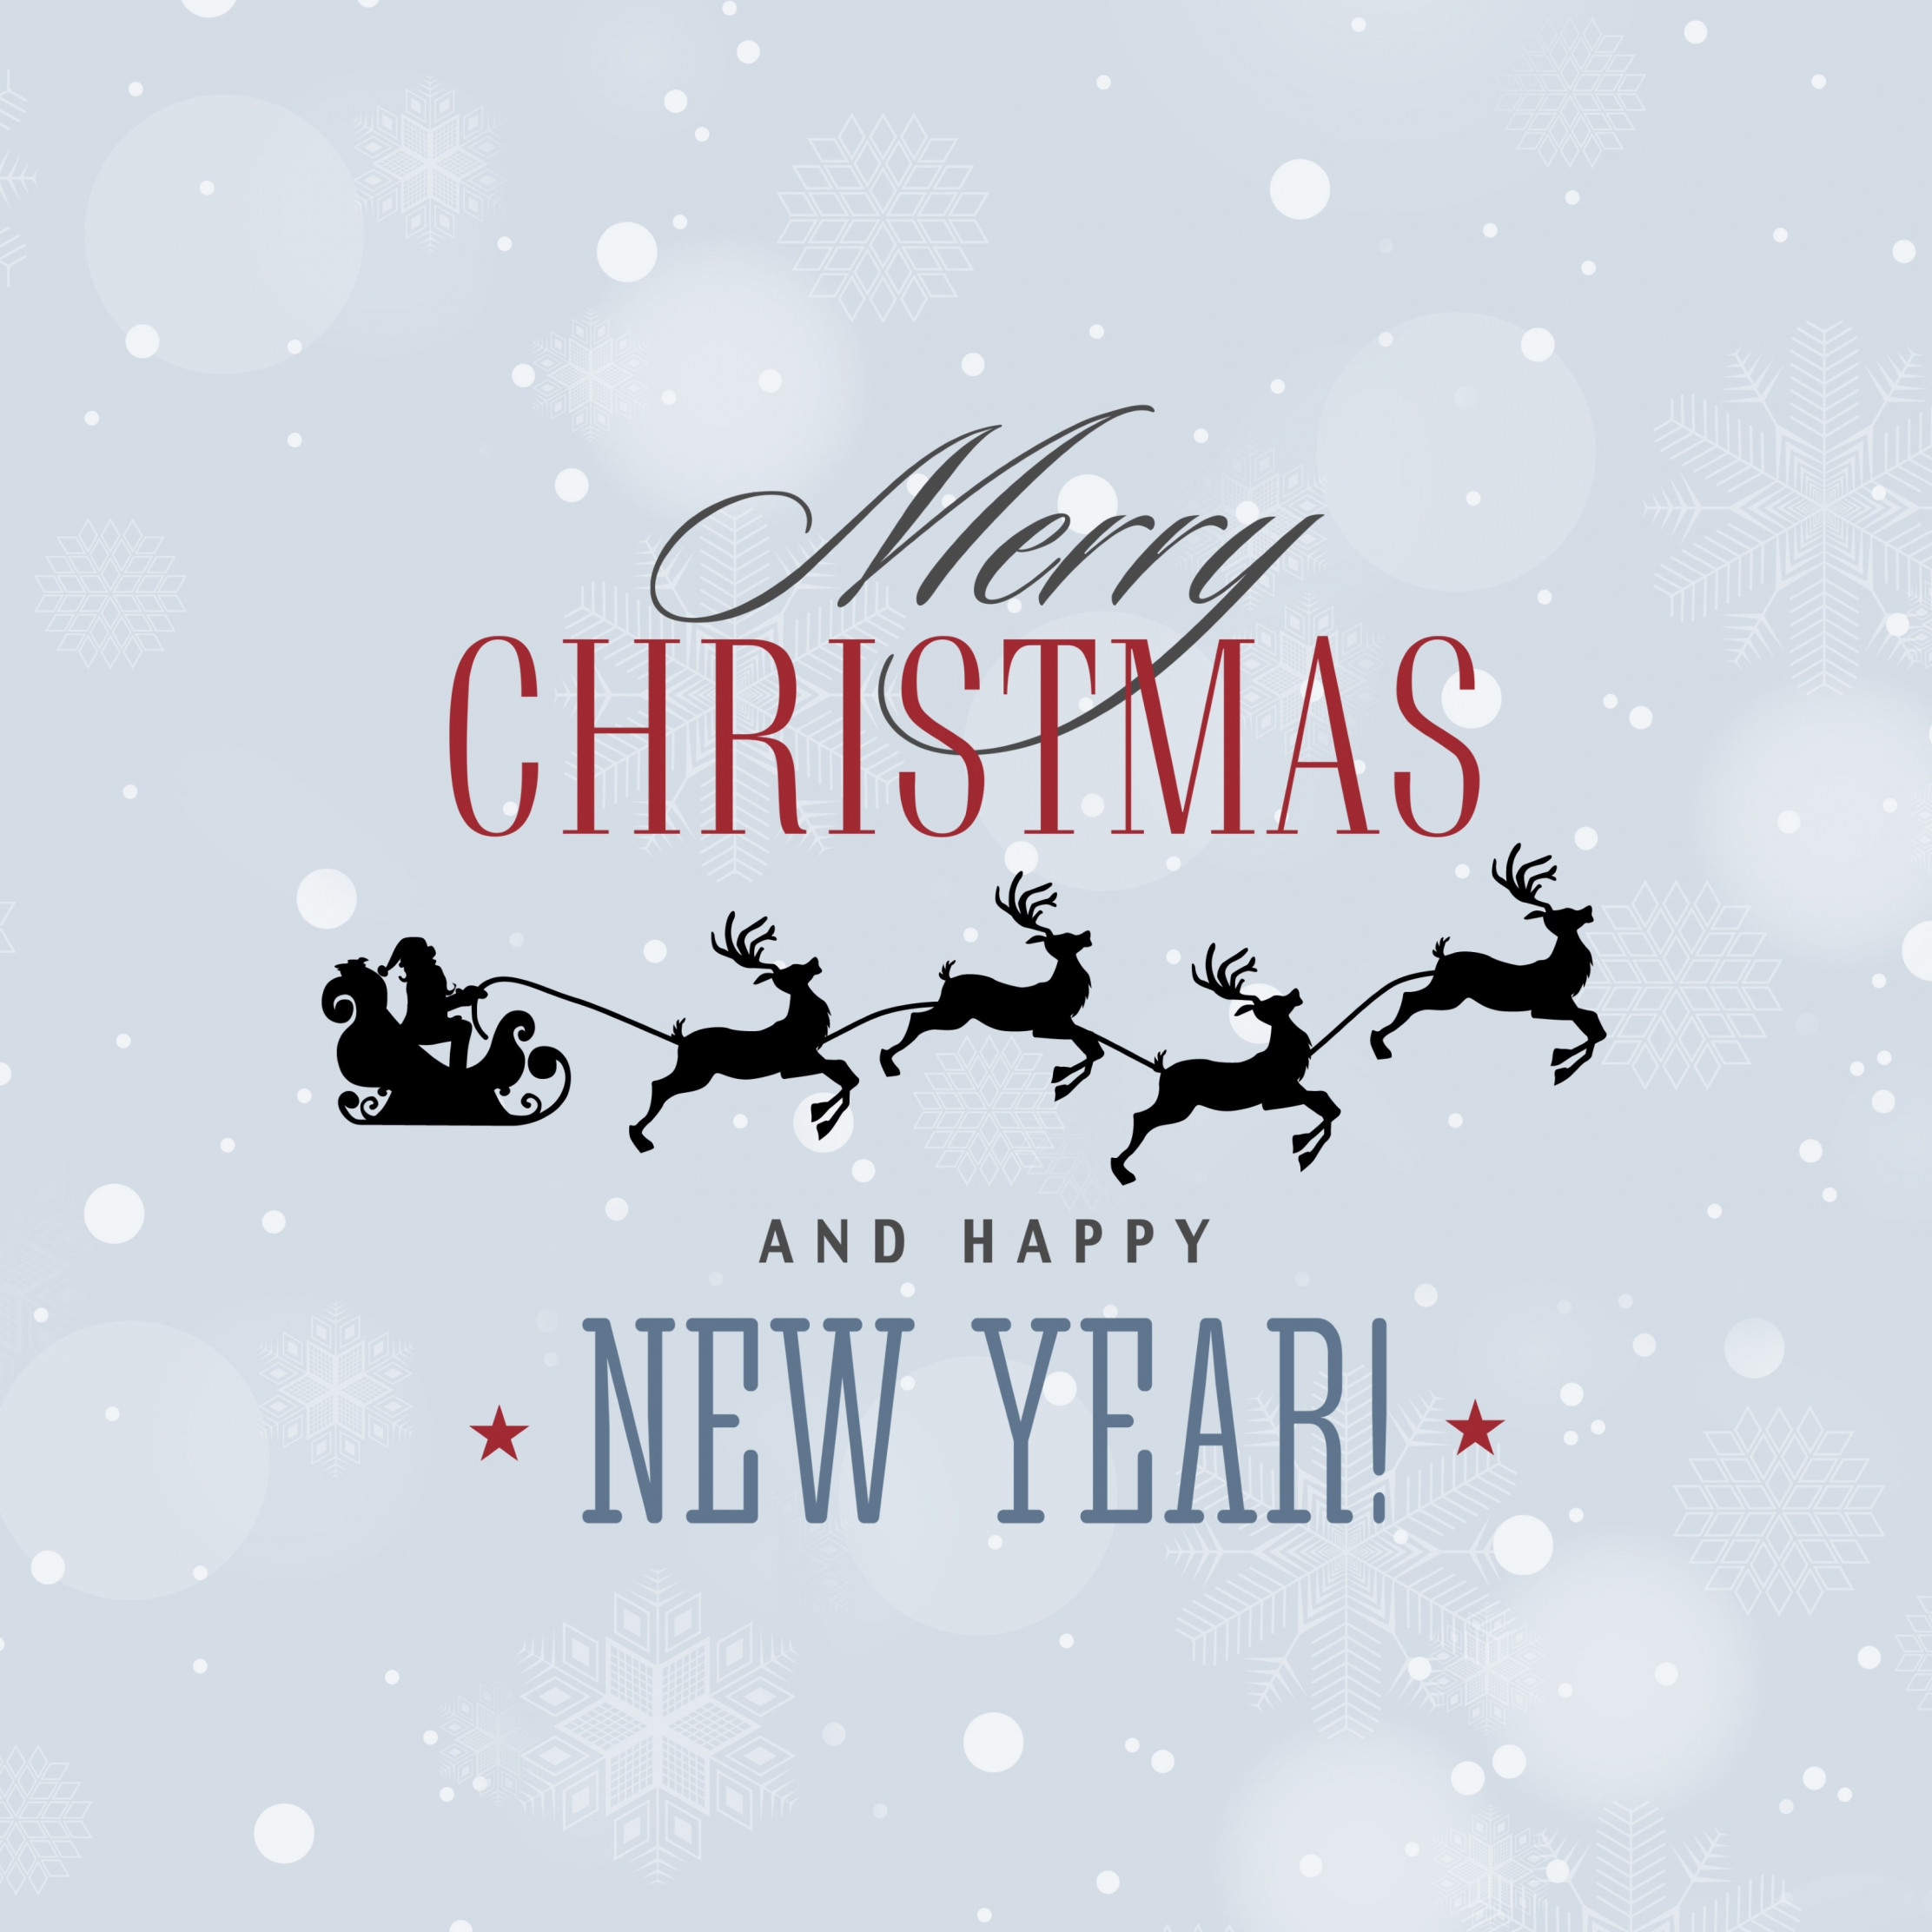 Merry Christmas and a Happy New Year wallpaper 2224x2224